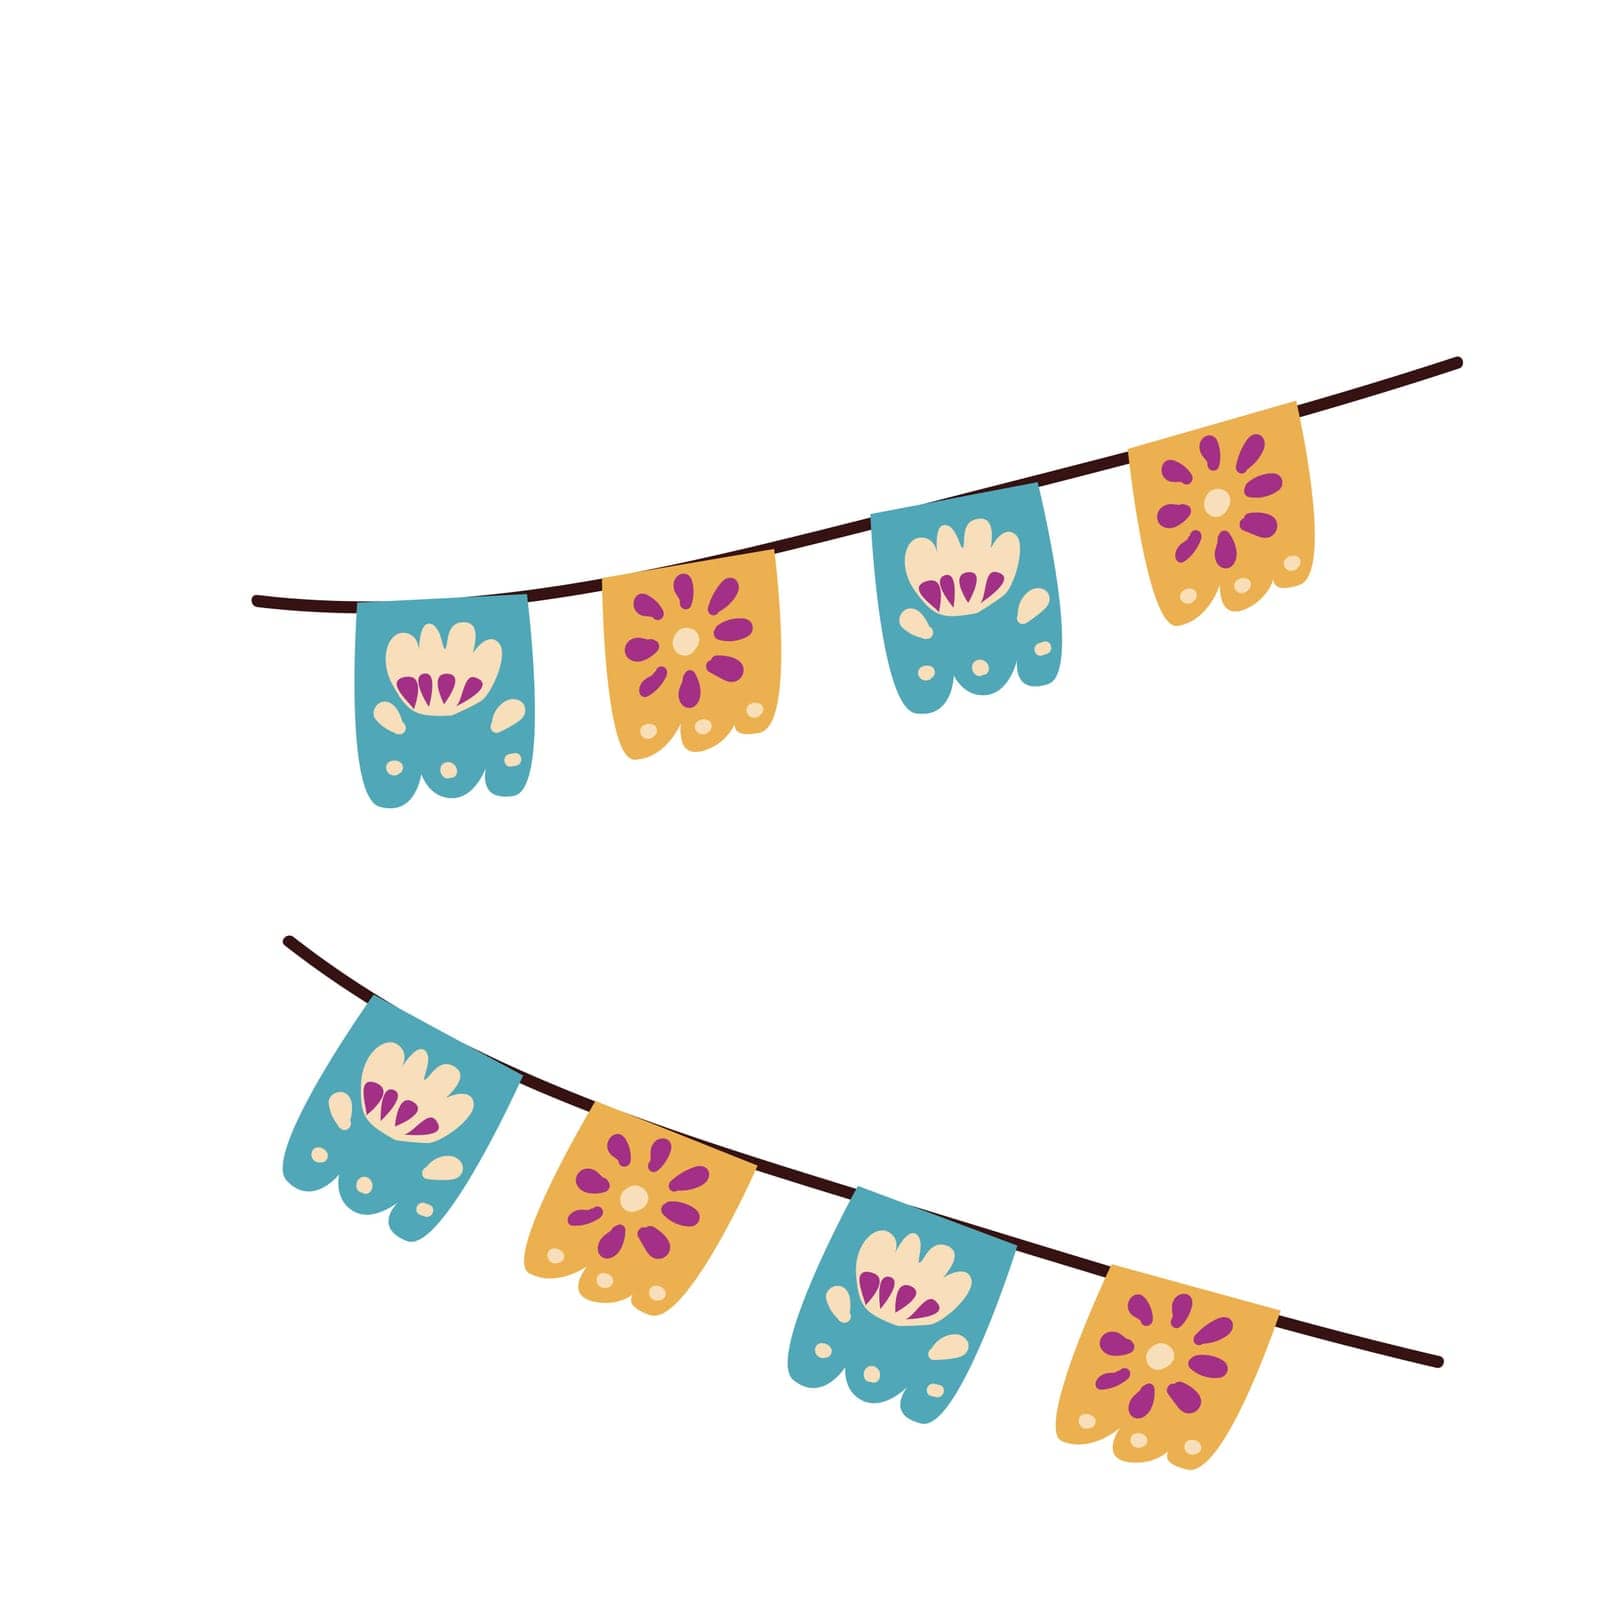 Mexican bunting for celebration design. Vector illustration isolated